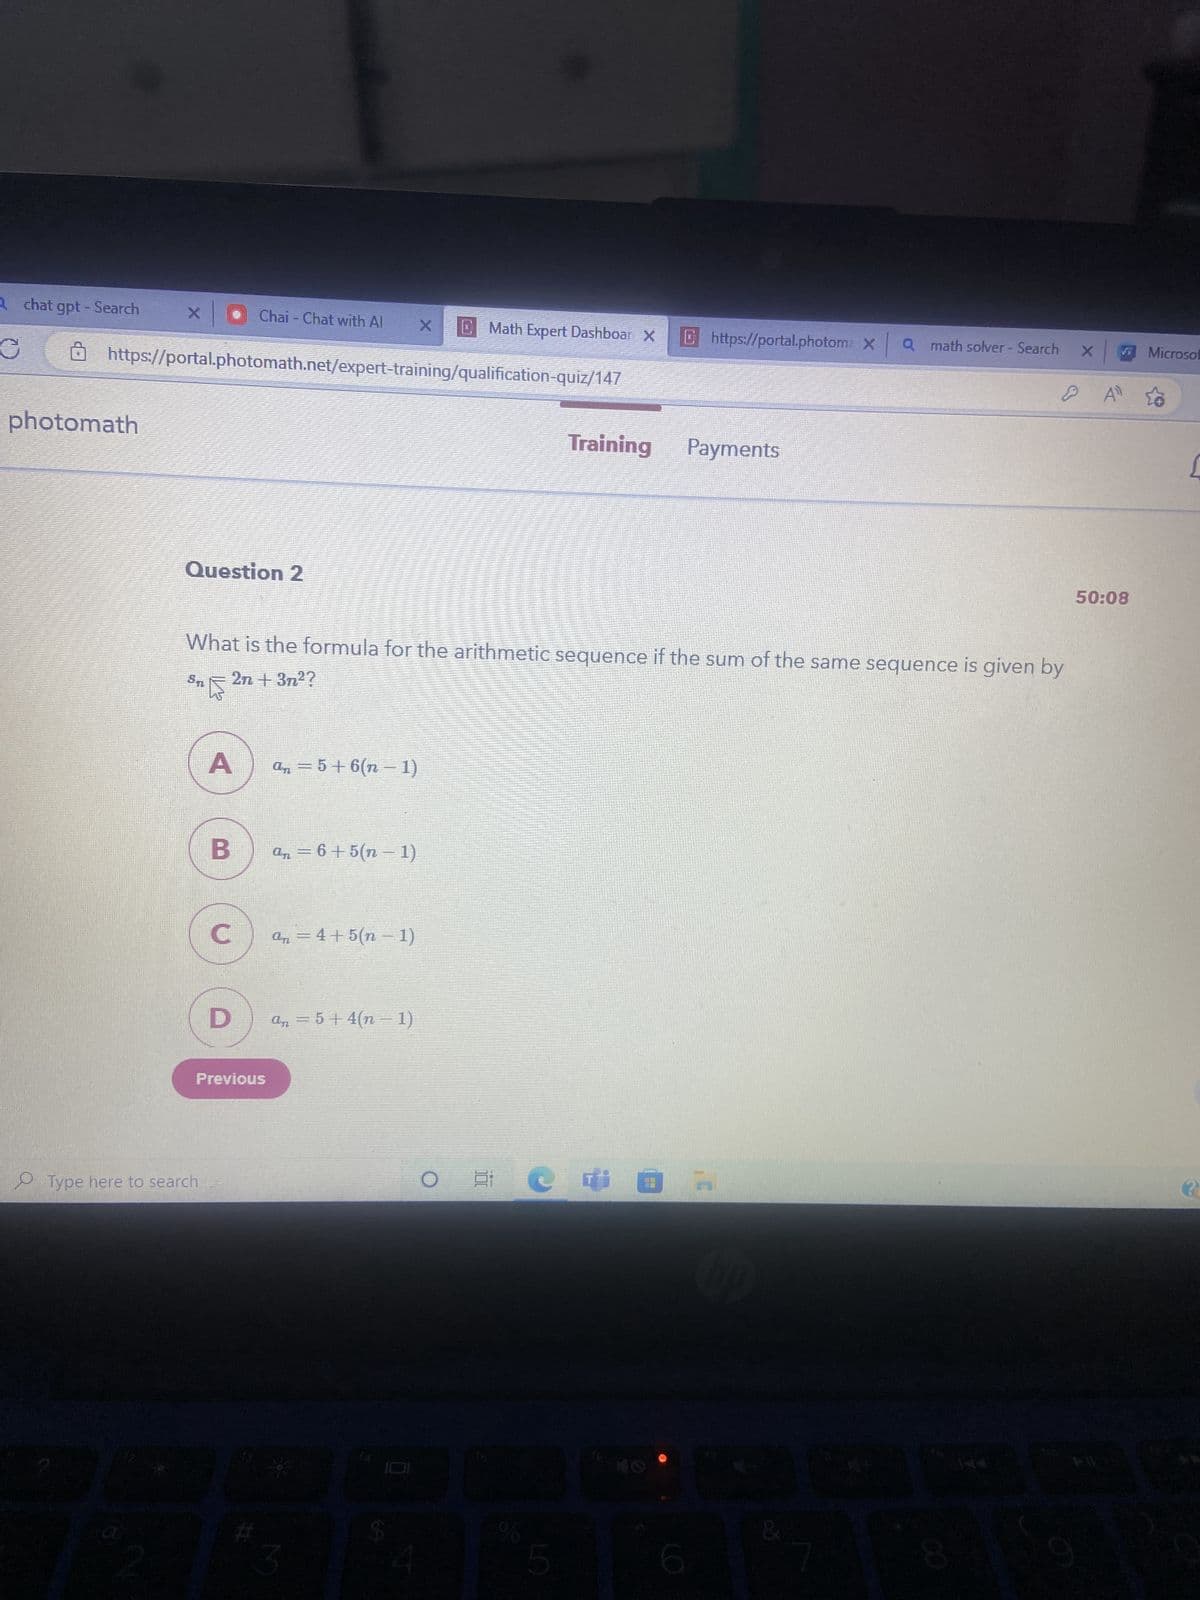 A chat gpt - Search
photomath
https://portal.photomath.net/expert-training/qualification-quiz/147
Question 2
ST
A
B
What is the formula for the arithmetic sequence if the sum of the same sequence is given by
2n + 3n²?
C
Chai - Chat with Al
D
Previous
Type here to search.
+3
an = 5 + 6(n − 1)
an = 6+5(n-1)
an = 4+5(n − 1)
an = 5+4(n − 1)
Math Expert Dashboar X
A
O i
$A
og
5
https://portal.photom: XQ math solver - Search
Training Payments
E
up
X
49
50:08
Microsof
2